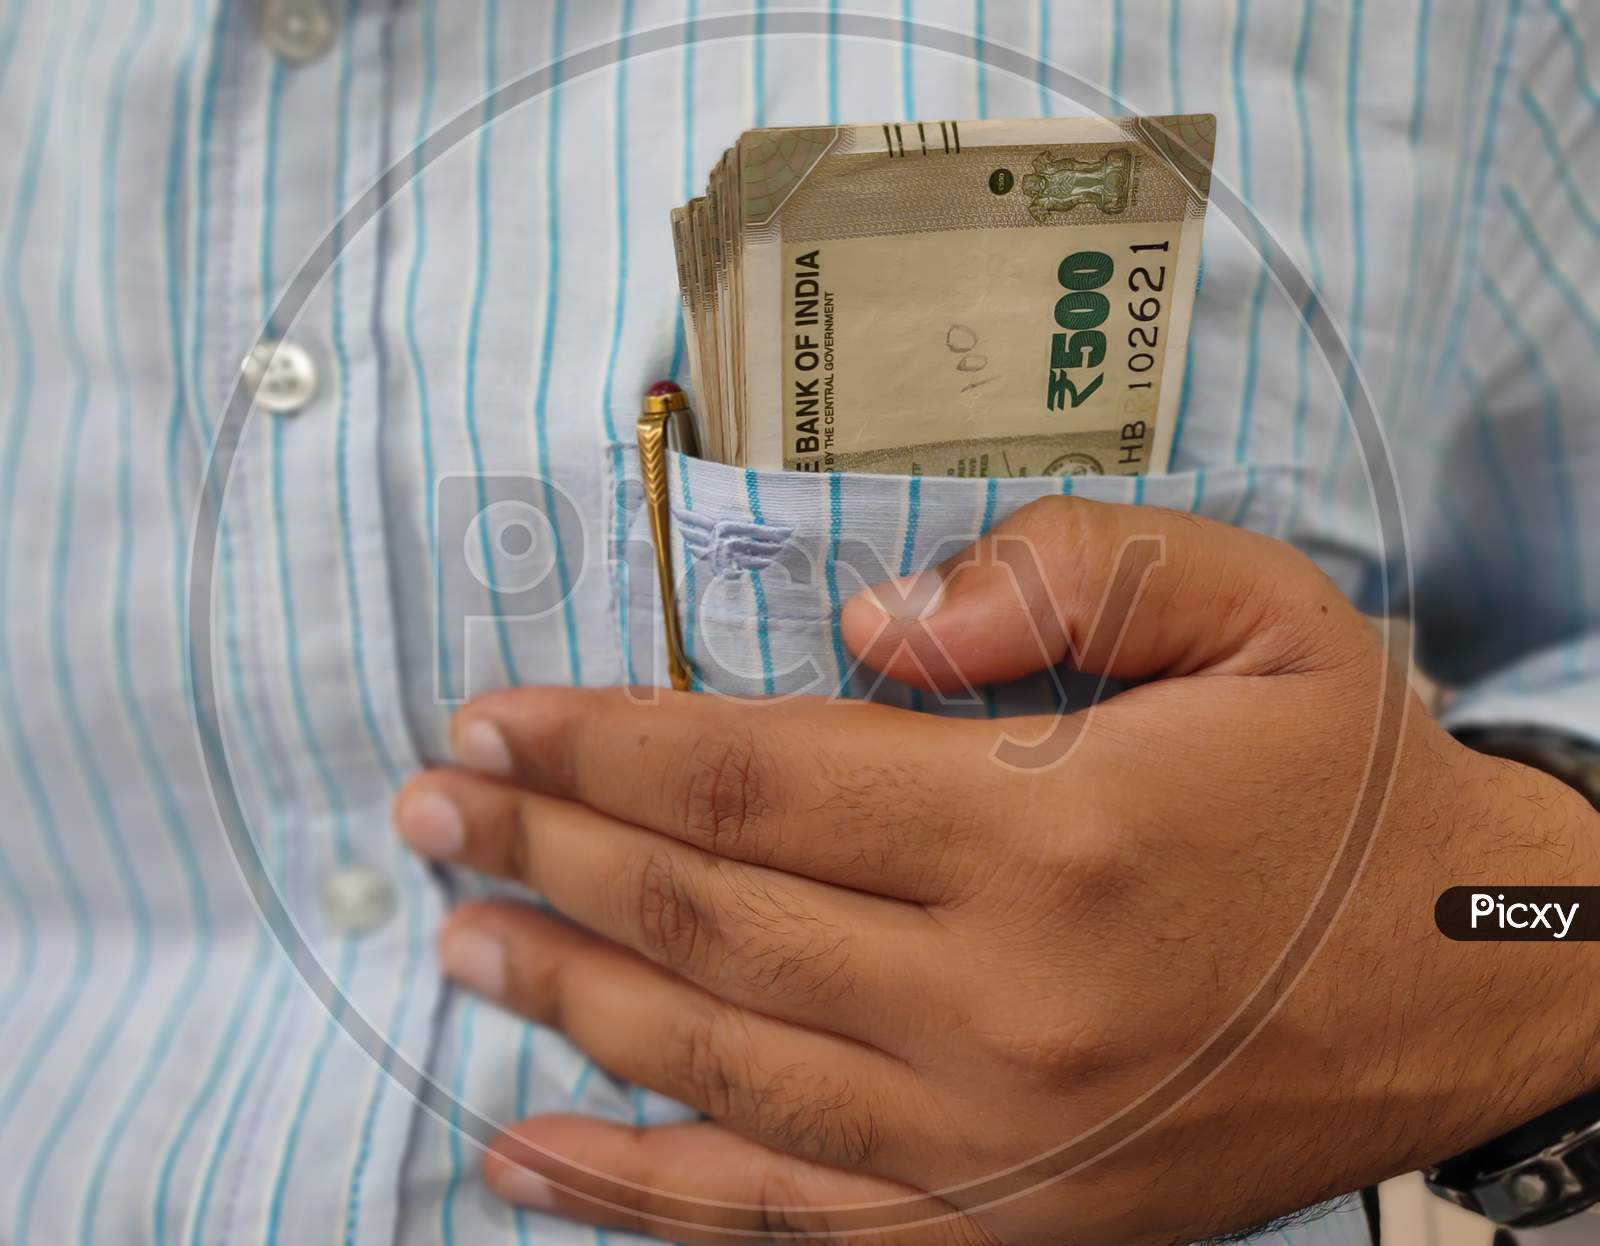 Common Man Secures His Earning By Holding Bundle Of 500 Rupee Notes In This Shirts Pocket.